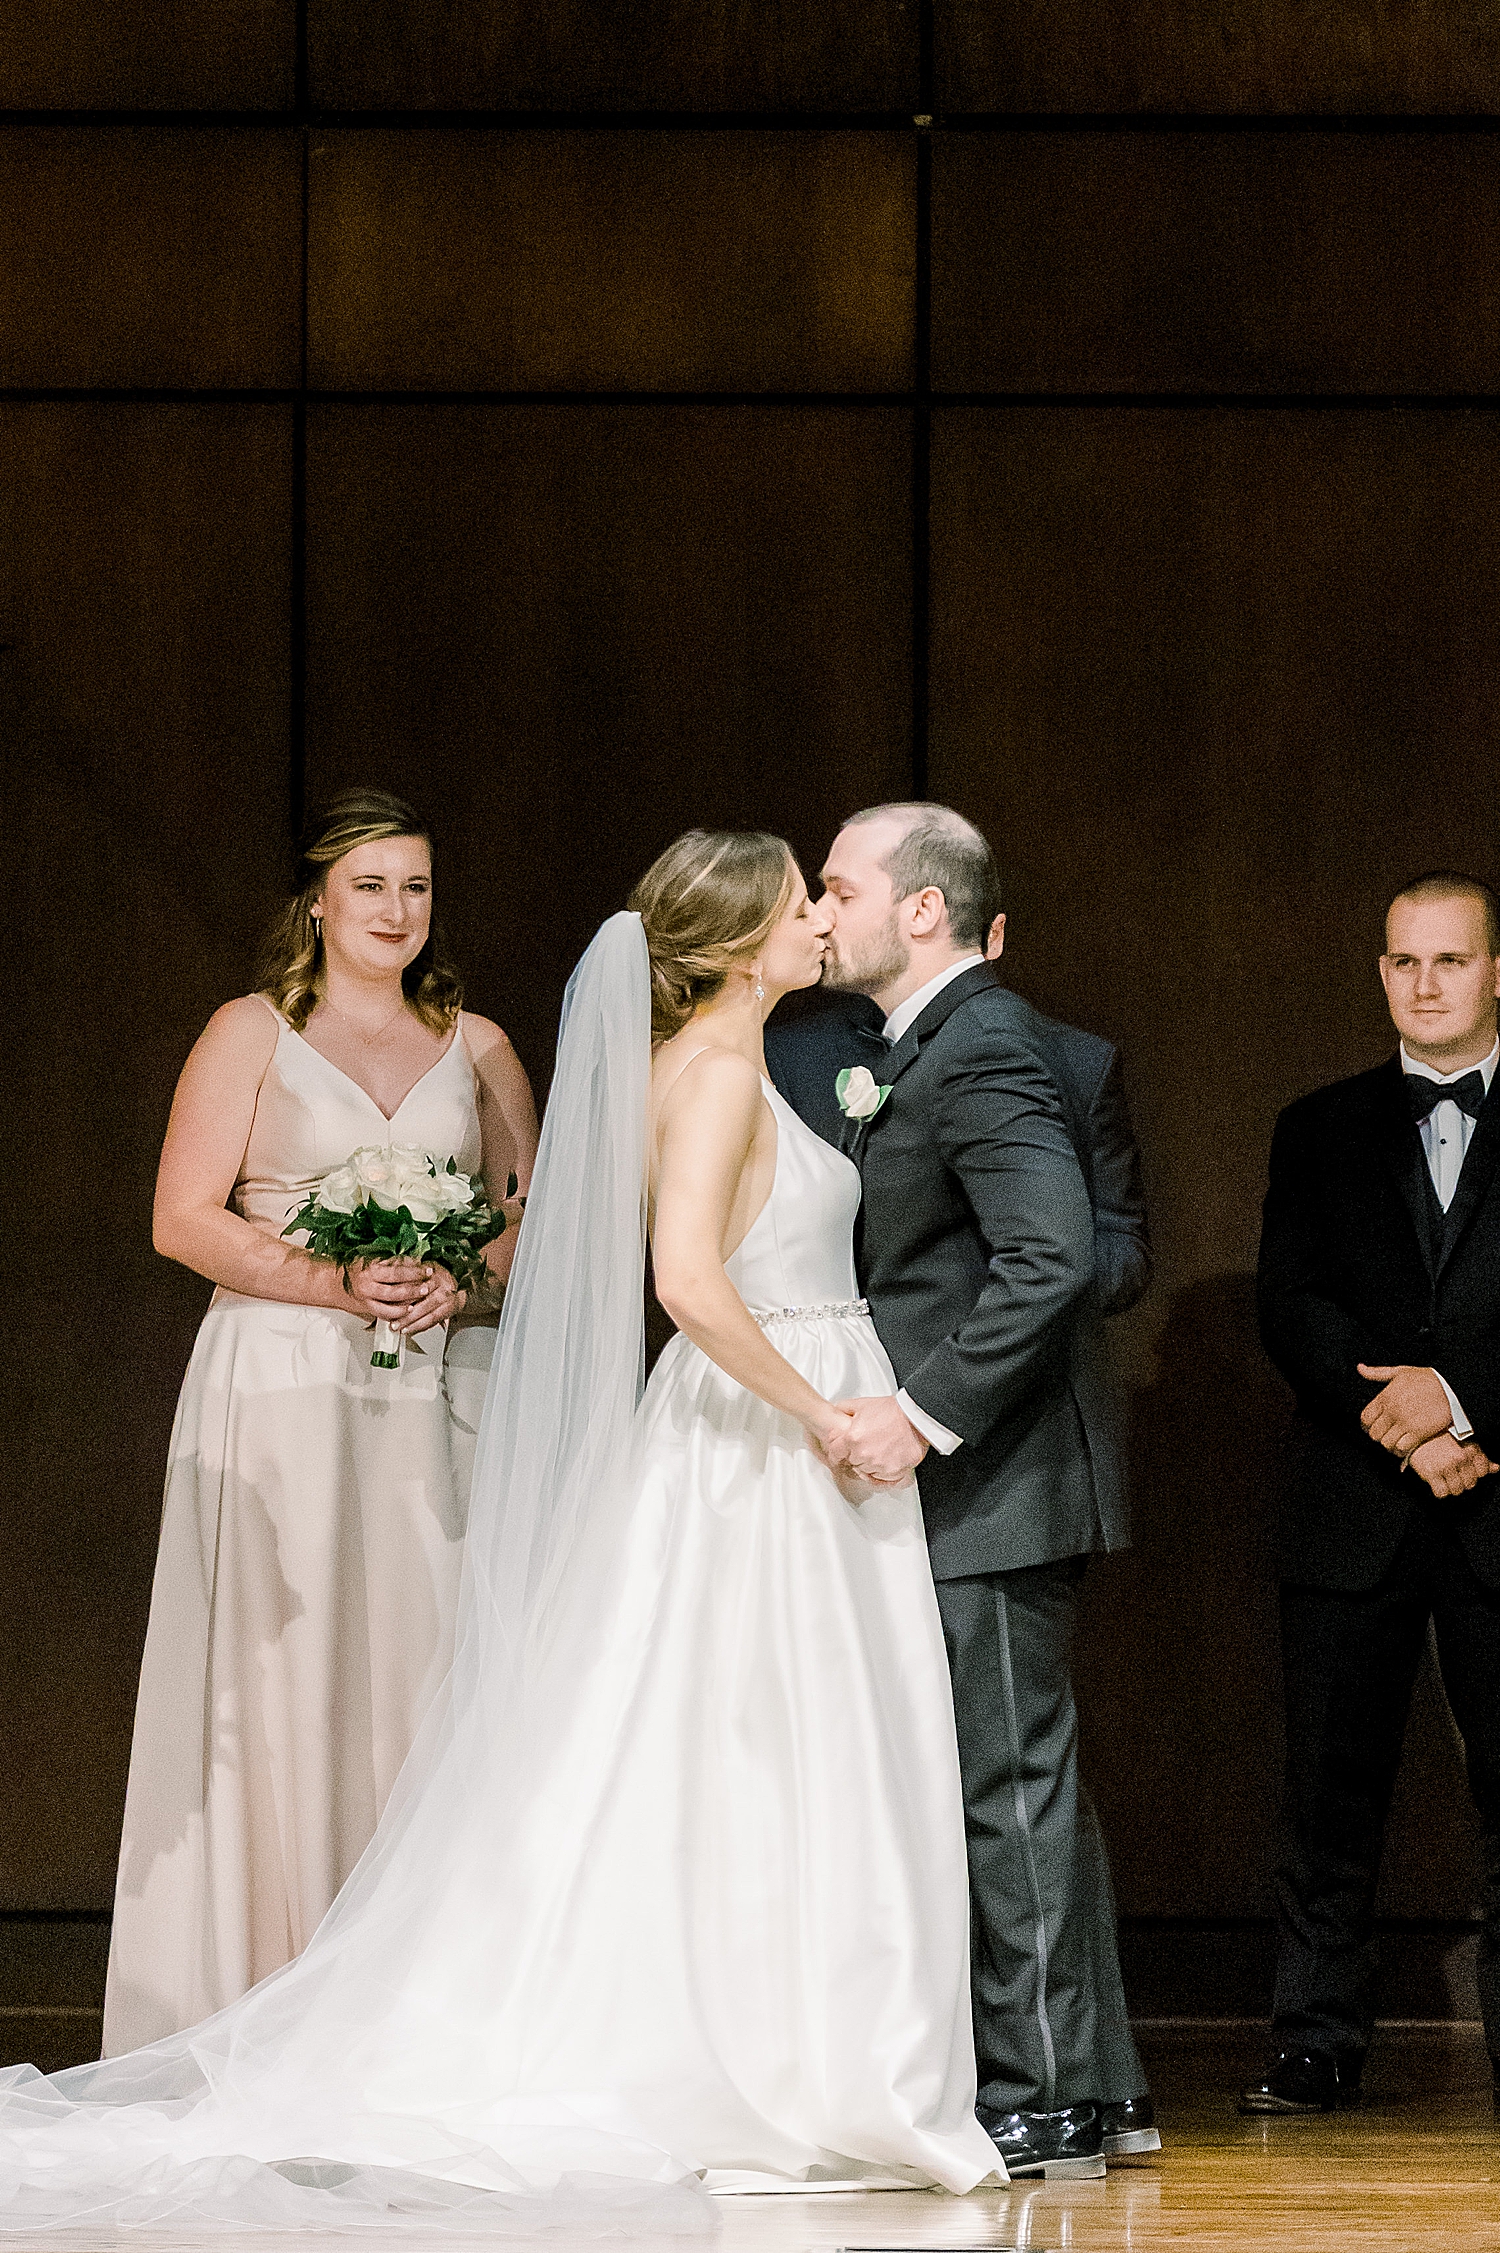 newlyweds kiss during traditional wedding ceremony at Mountain Brook Community Church